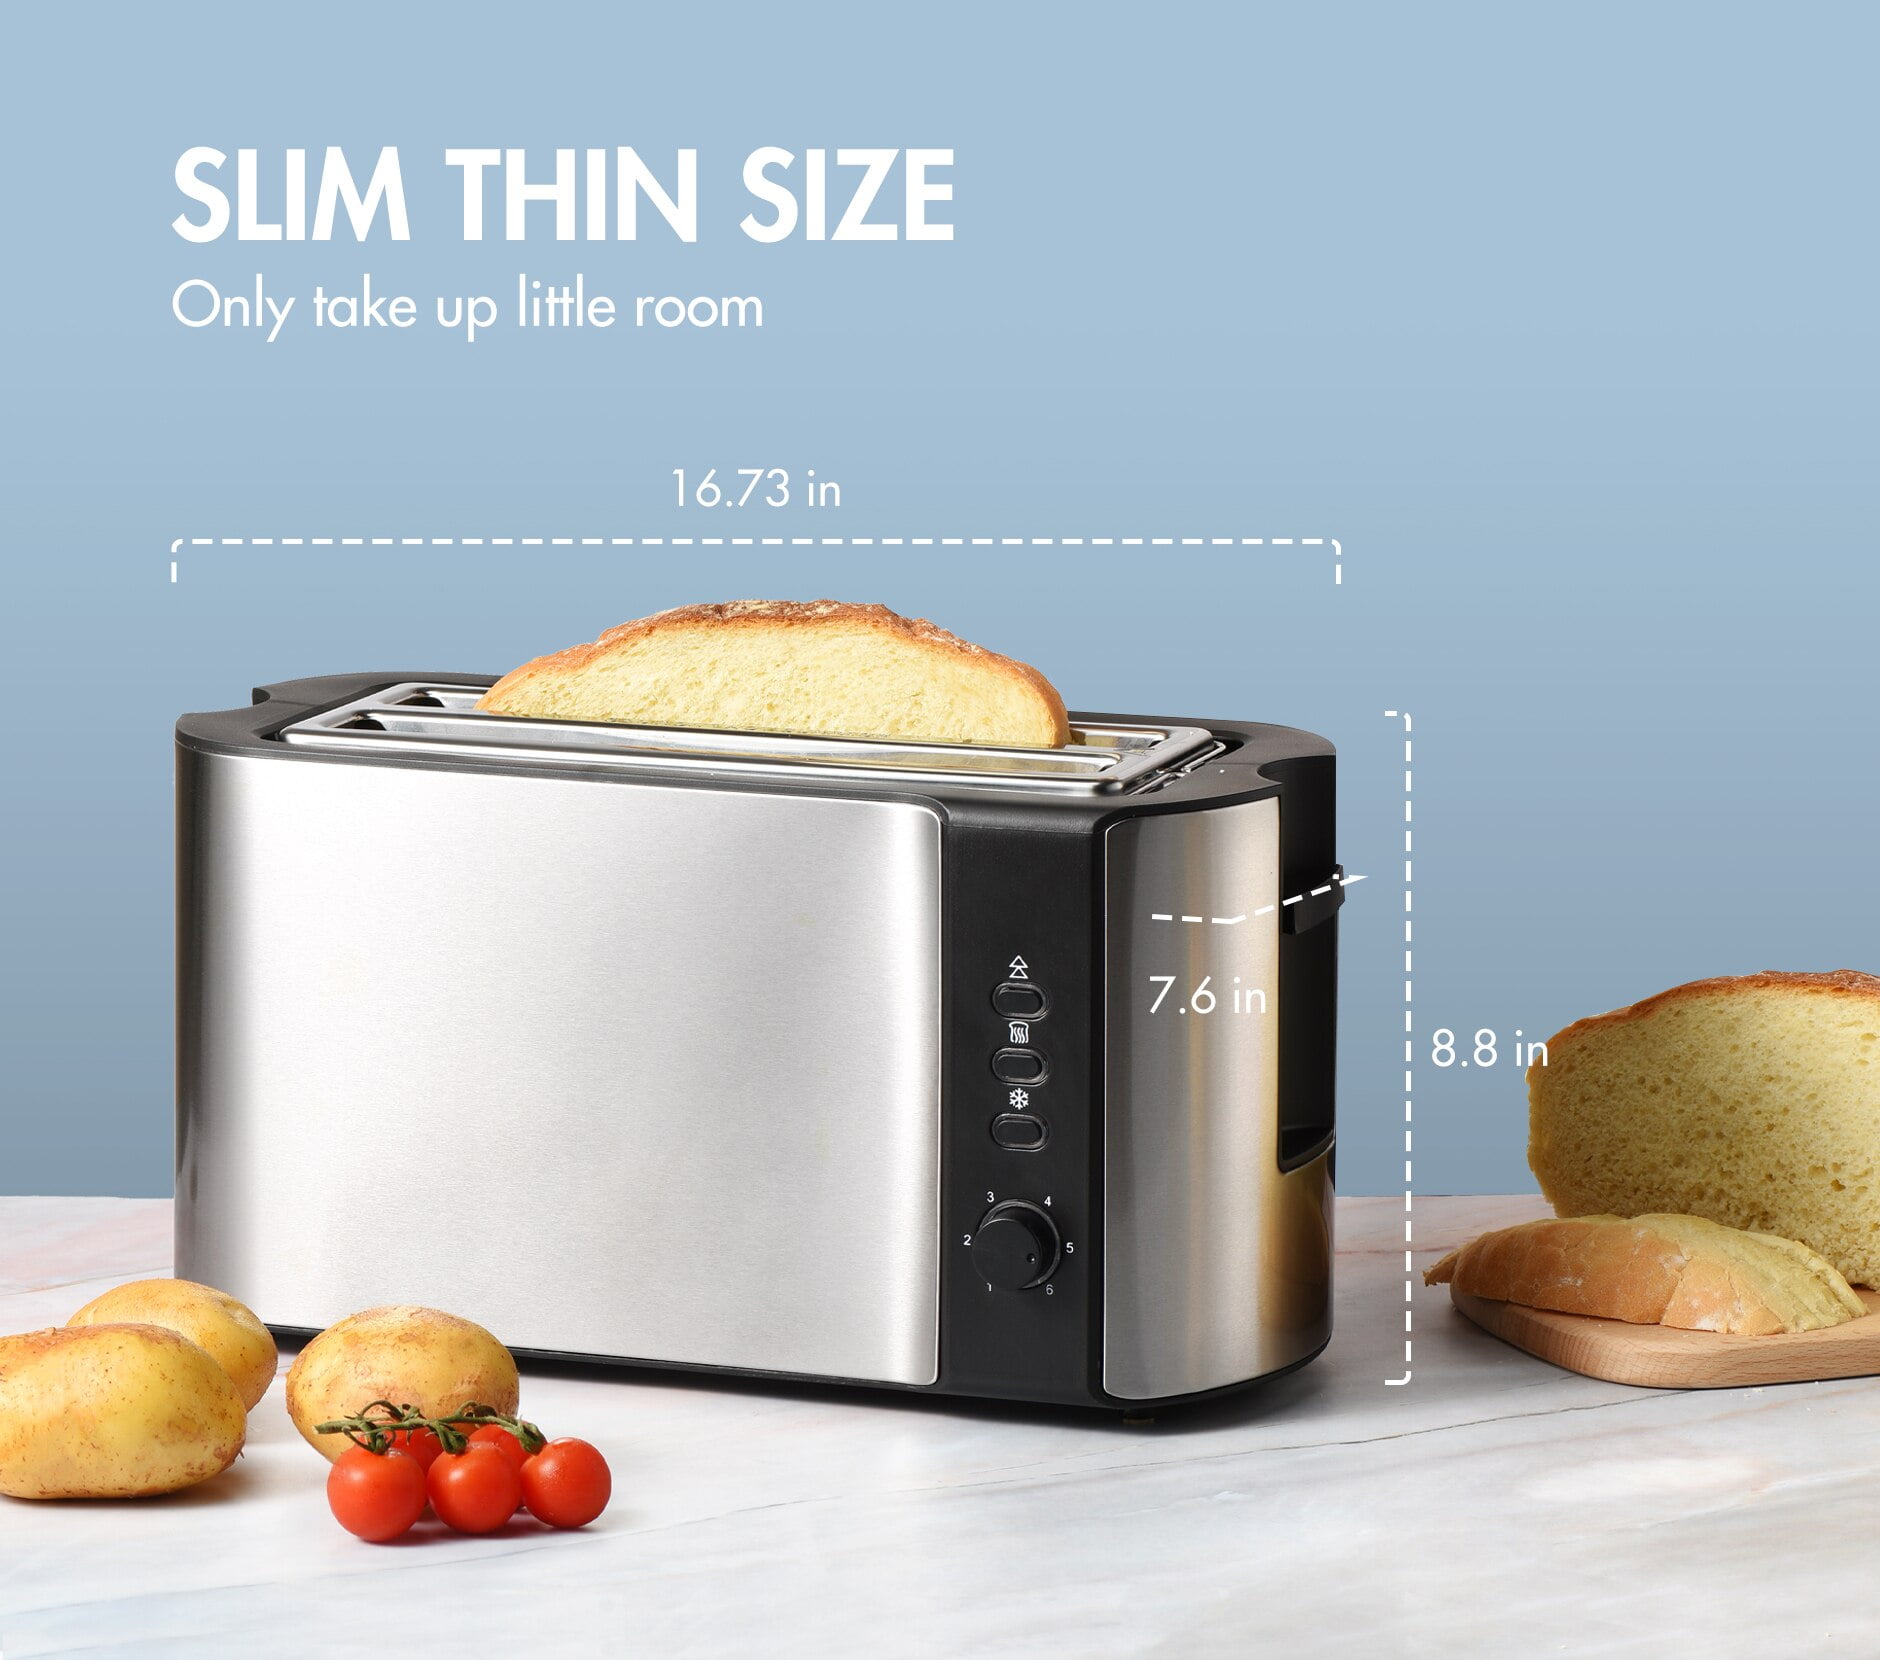 IKICH Long Slot Toaster review - The Gadgeteer